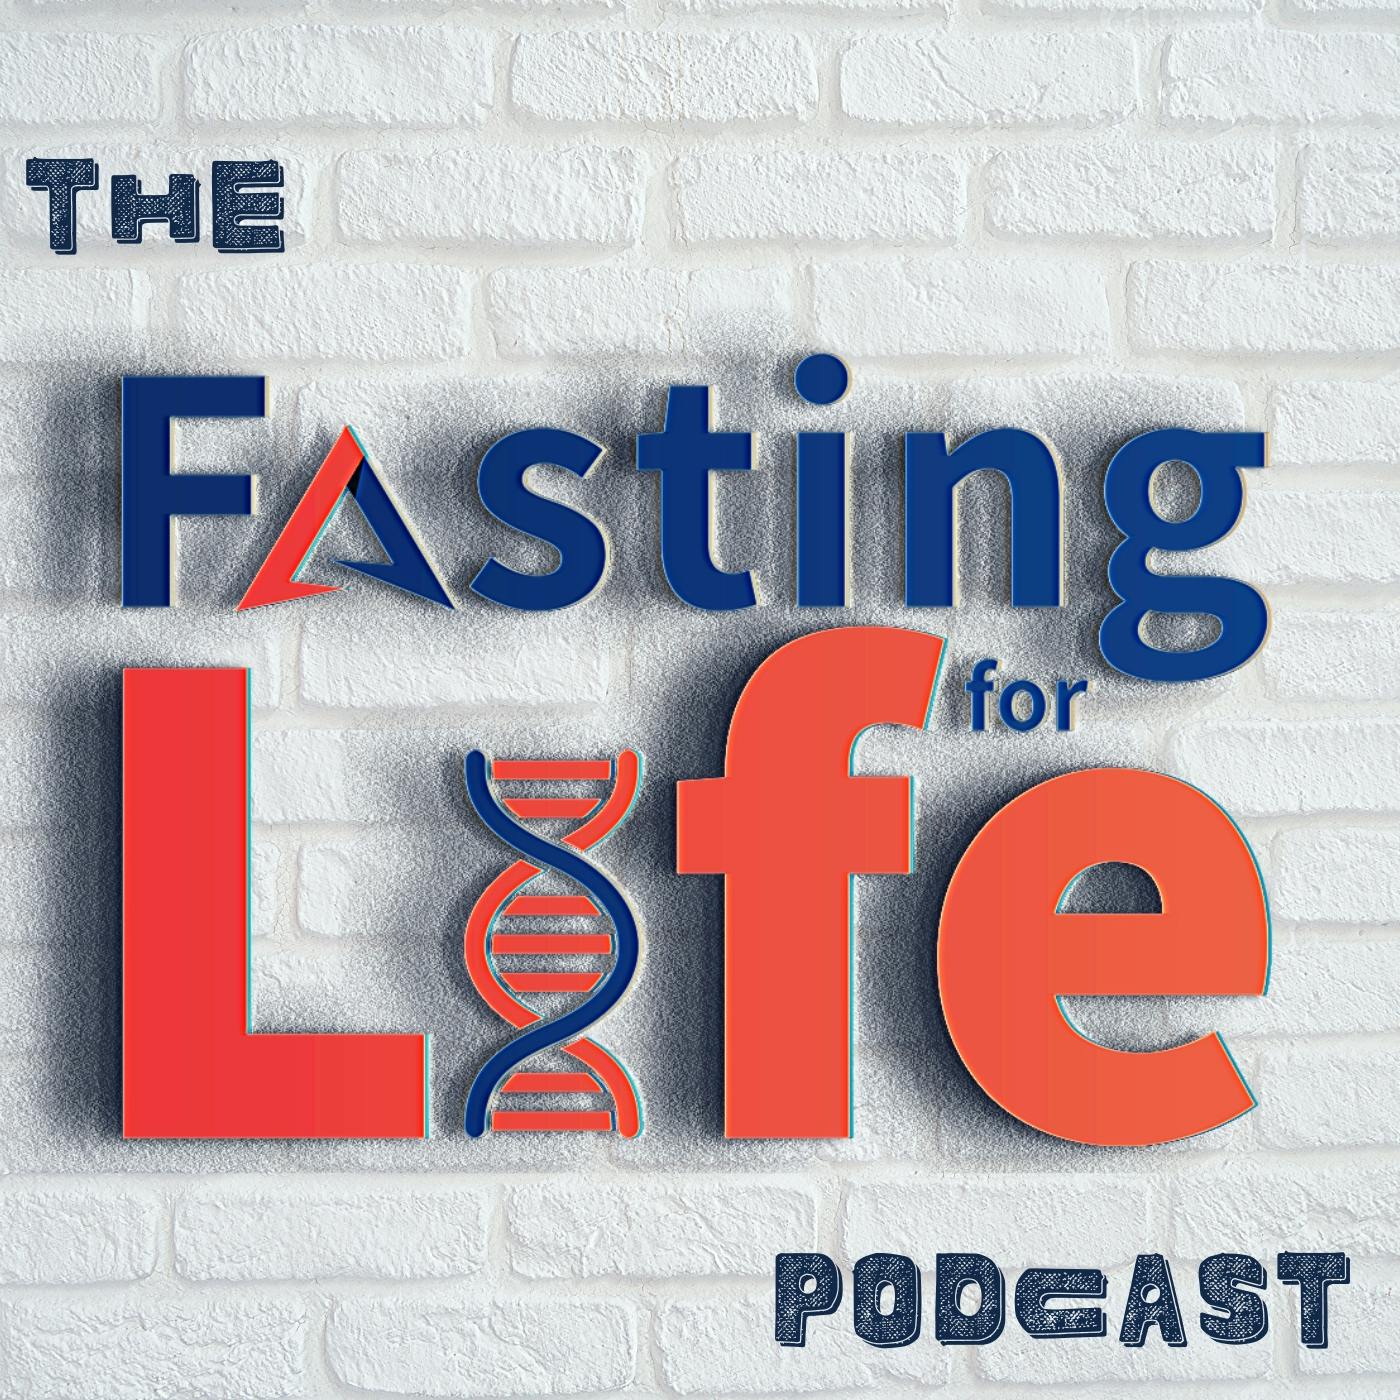 Ep. 186 - Modified Alternate Day Fasting vs. Calorie Restriction for Lowering Weight & Blood Sugar | Preventing & Reversing Metabolic Syndrome & Pre-Diabetes with Fasting | What is the best fasting sc